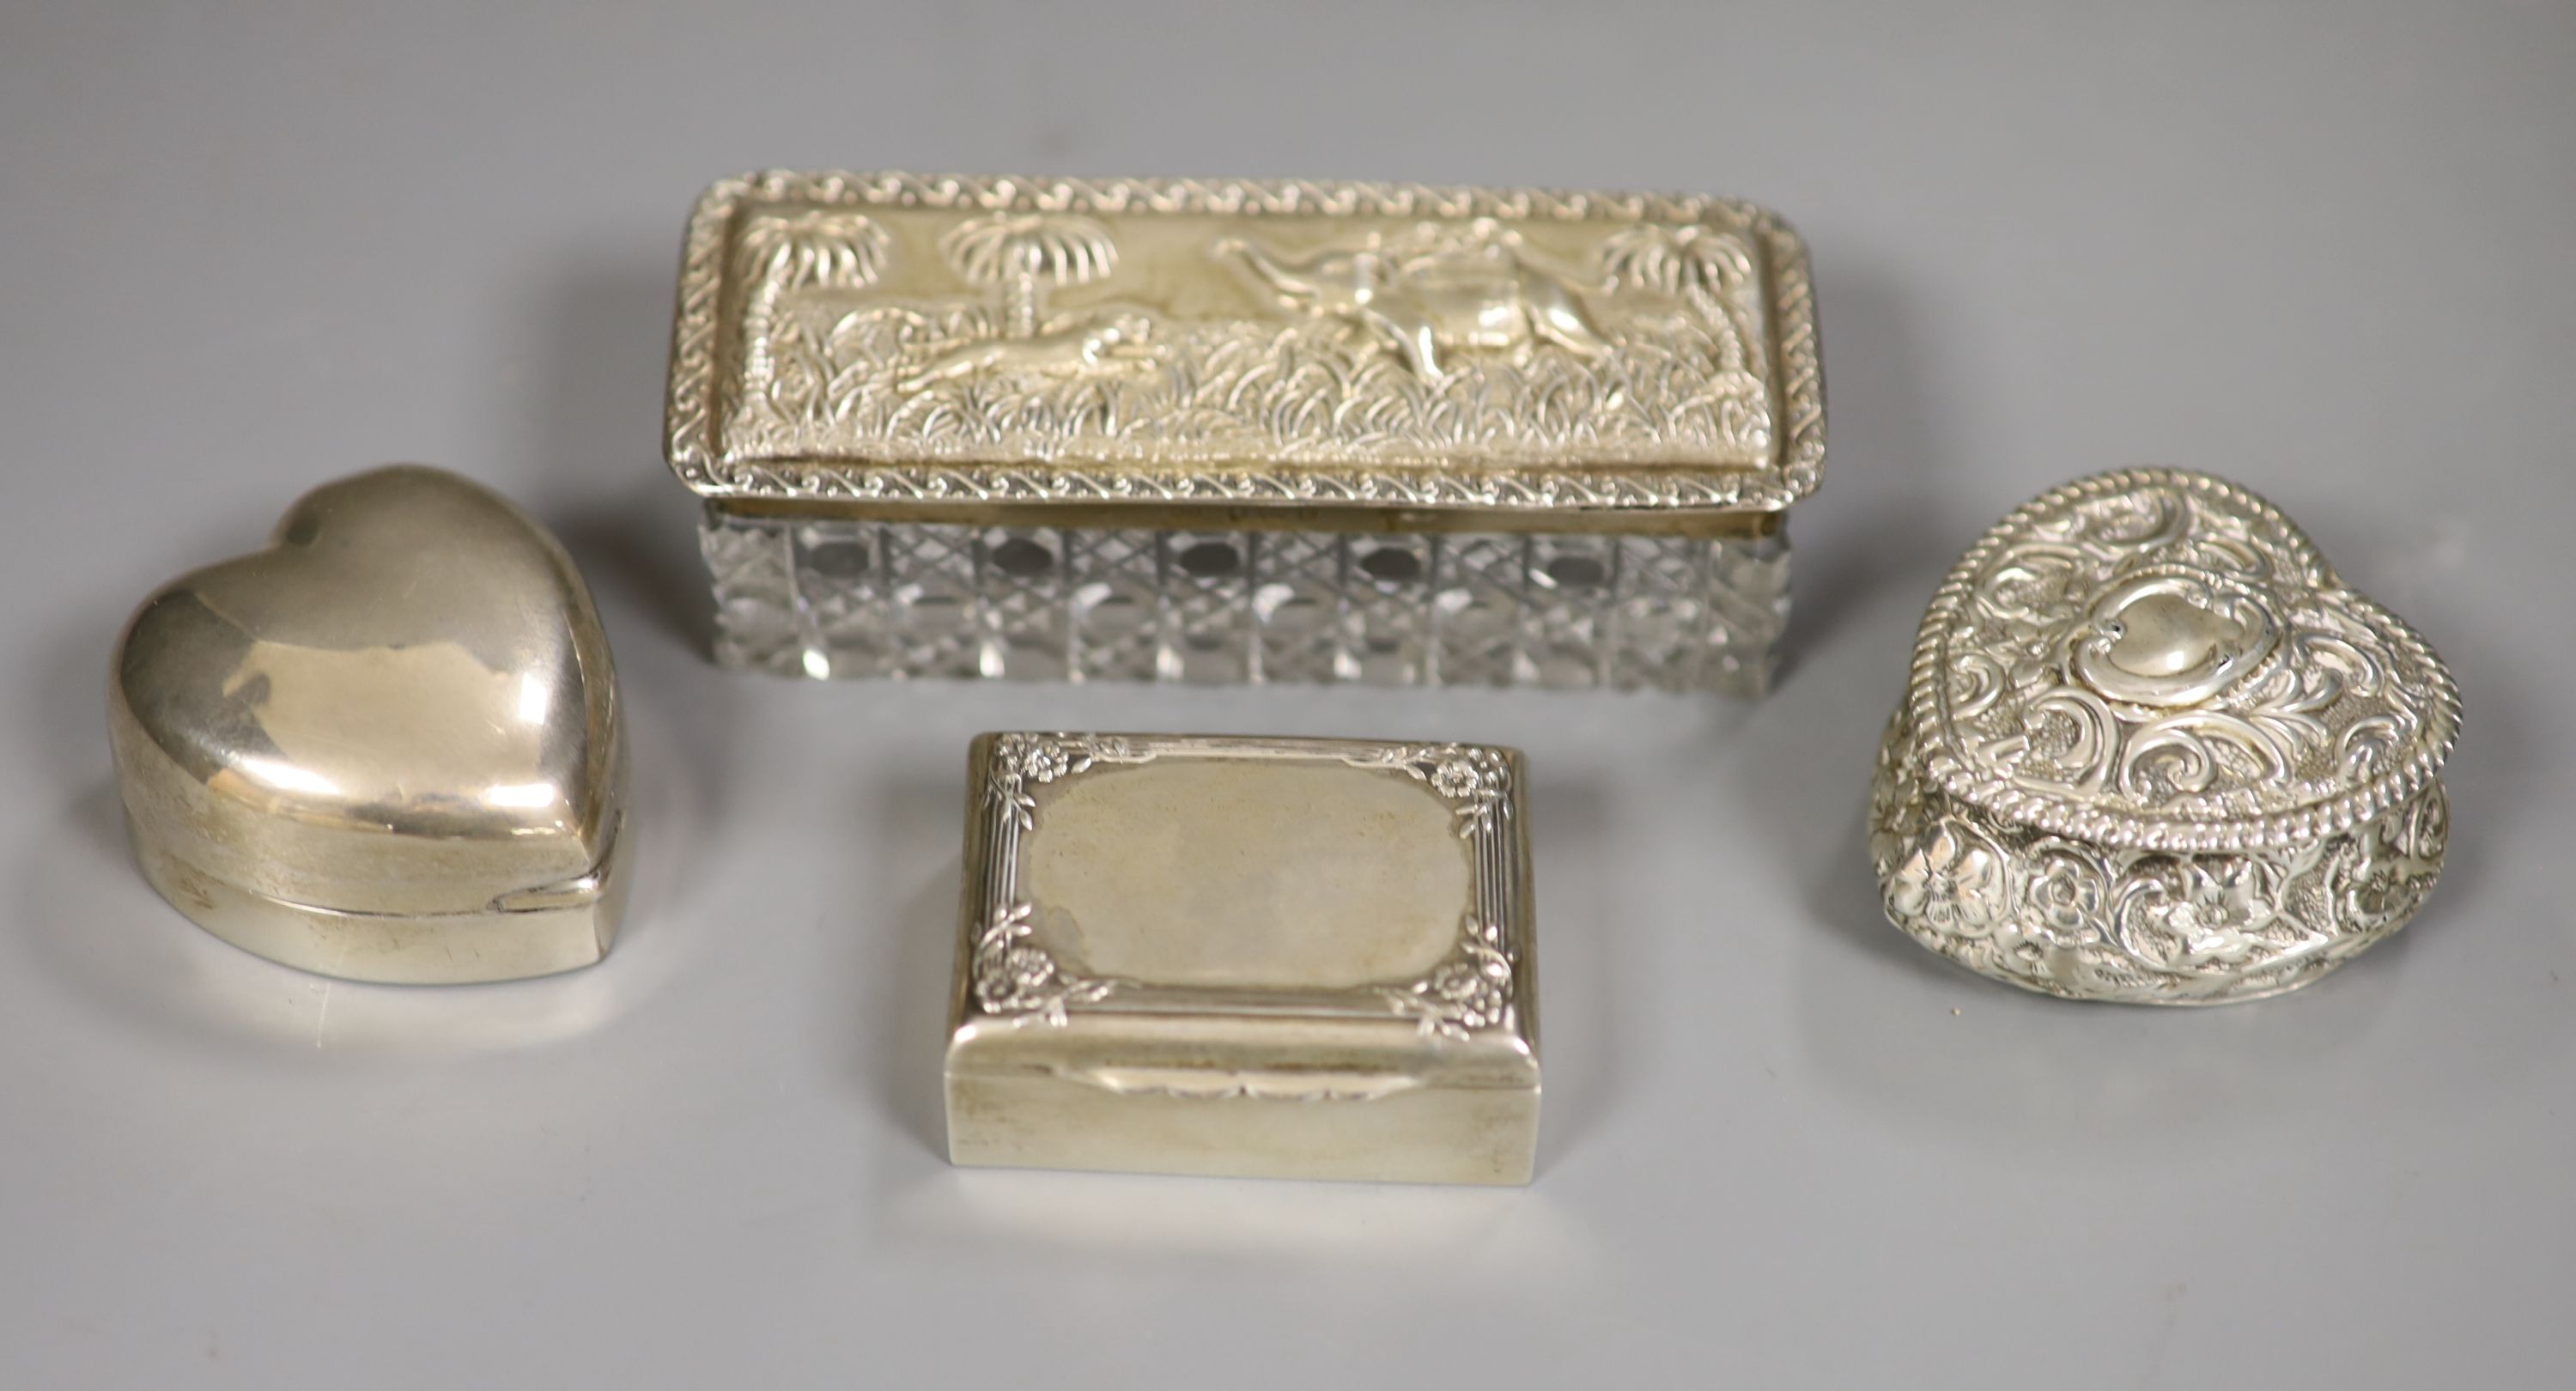 Two Victorian/Edwardian silver heart shaped pill boxes (one with holes), a rectangular snuff box and a toilet box.